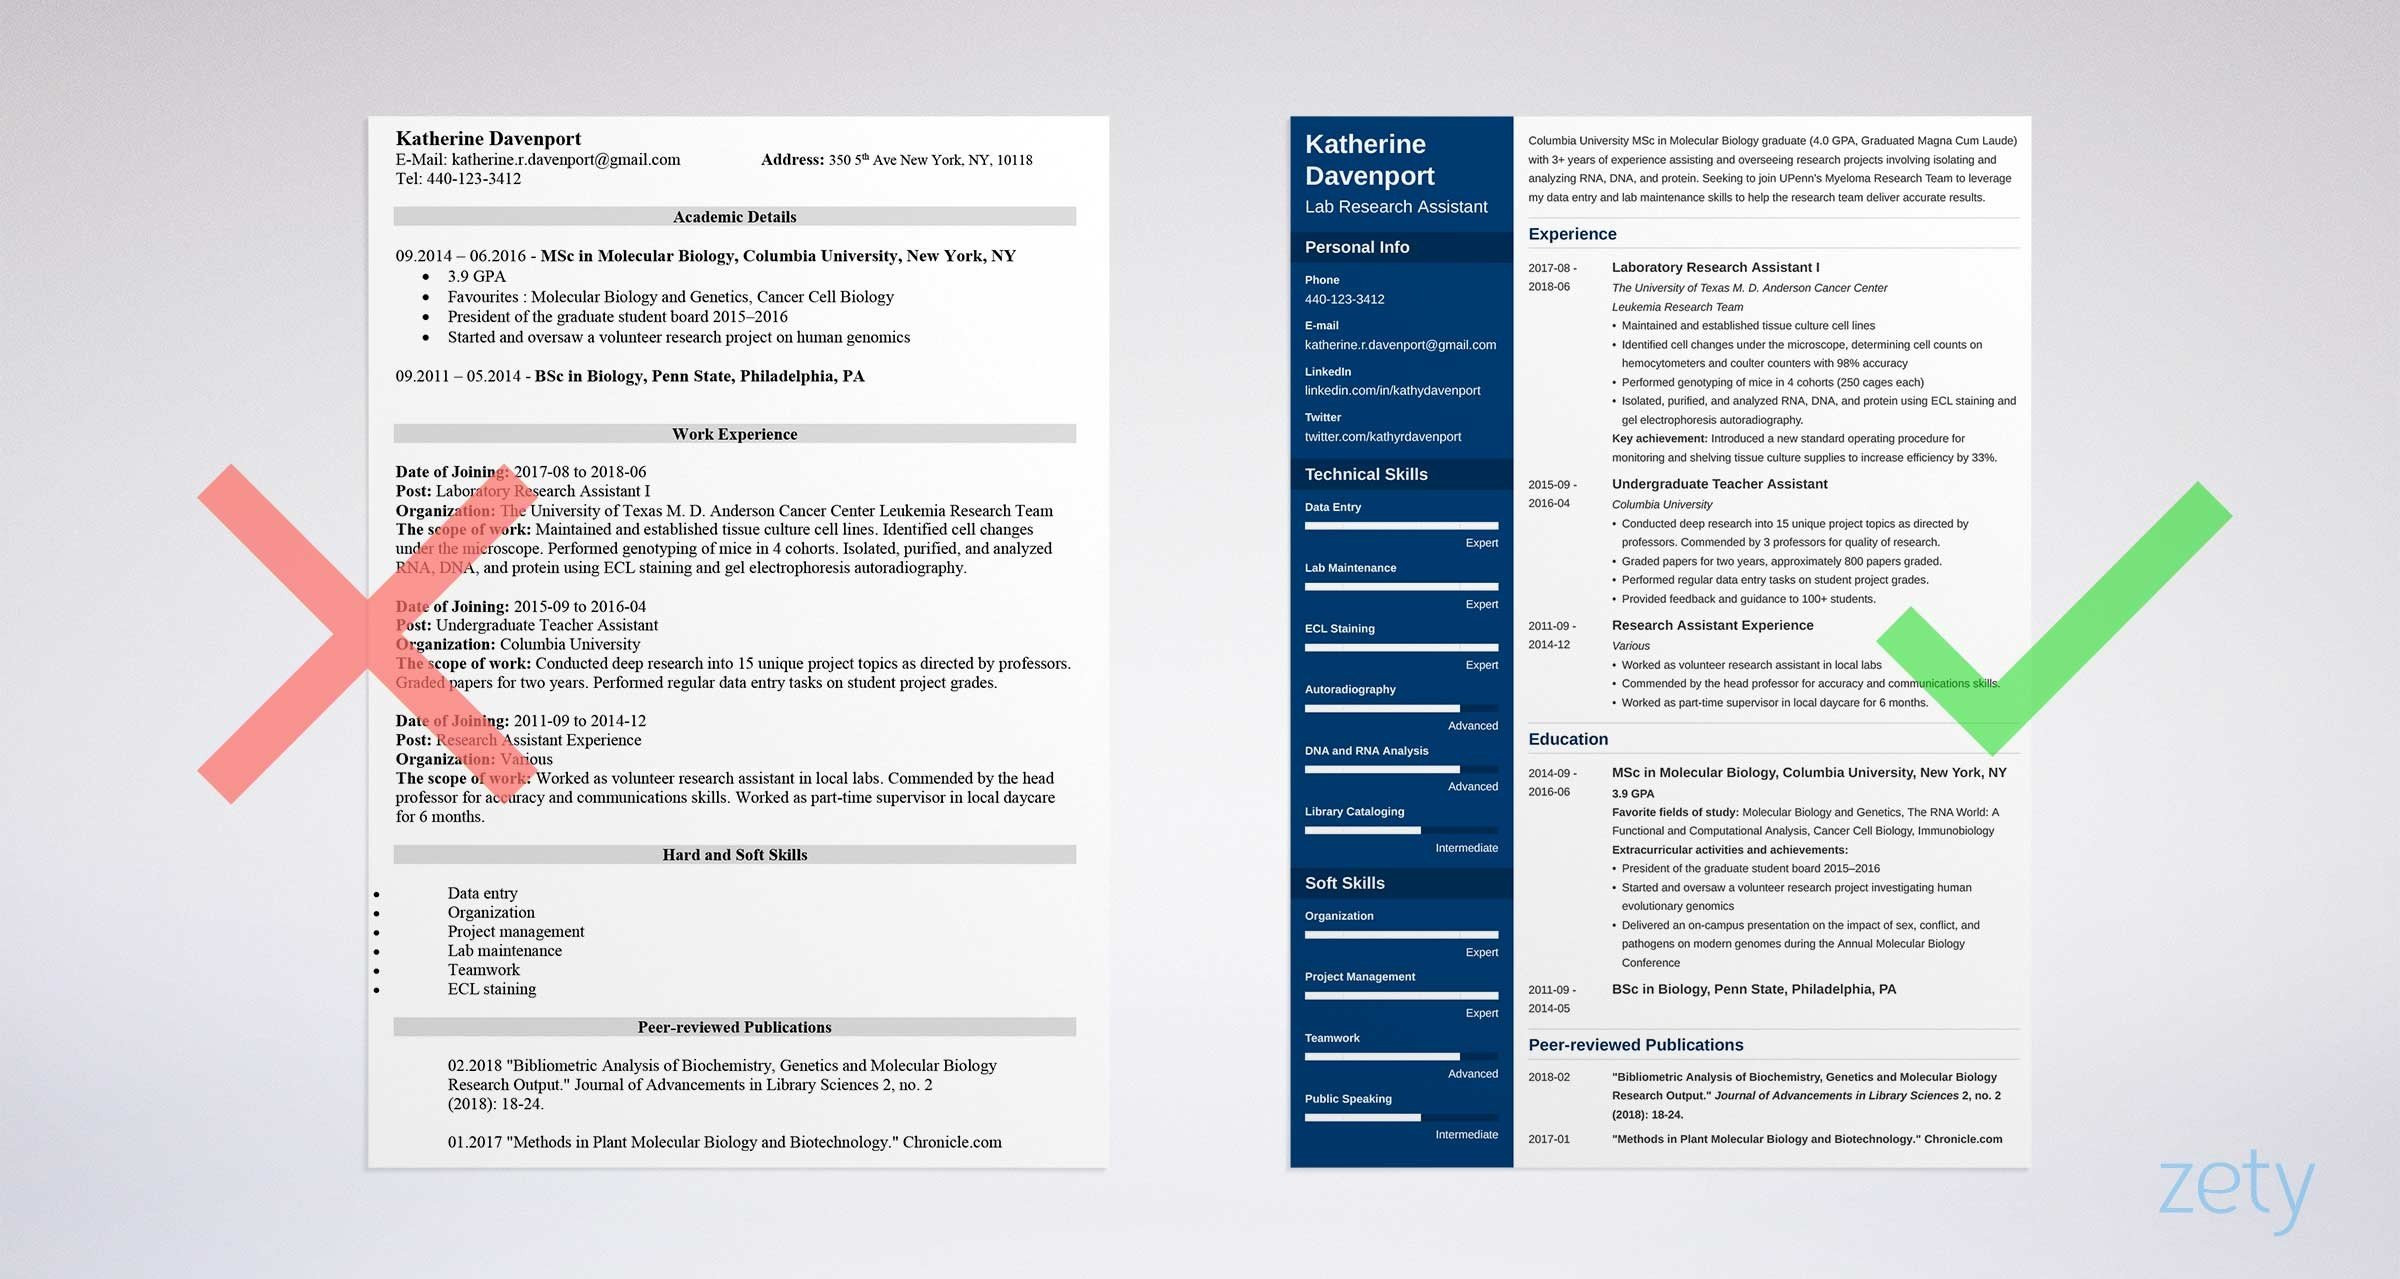 Sample Resume for Public Policy Research assistant Research assistant Resume: Sample Job Description & Skills